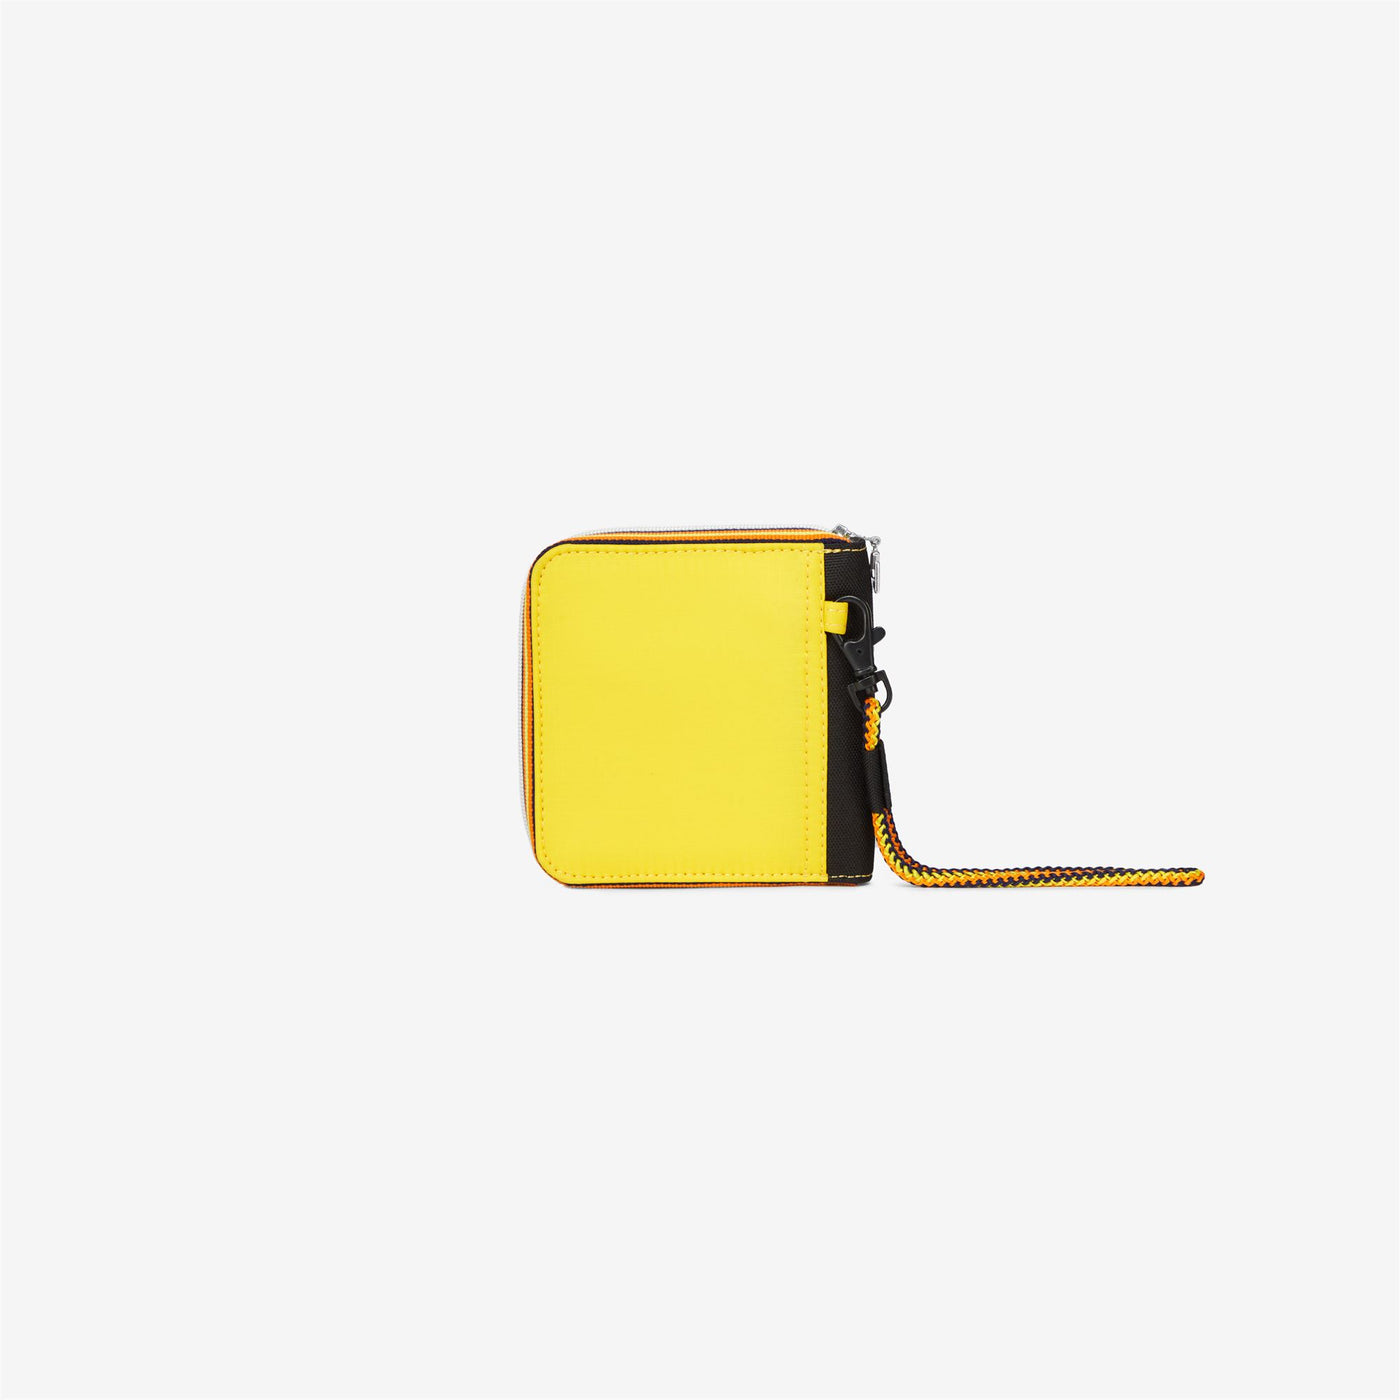 Small Accessories Unisex YERVILLE Wallet YELLOW DK Dressed Front (jpg Rgb)	